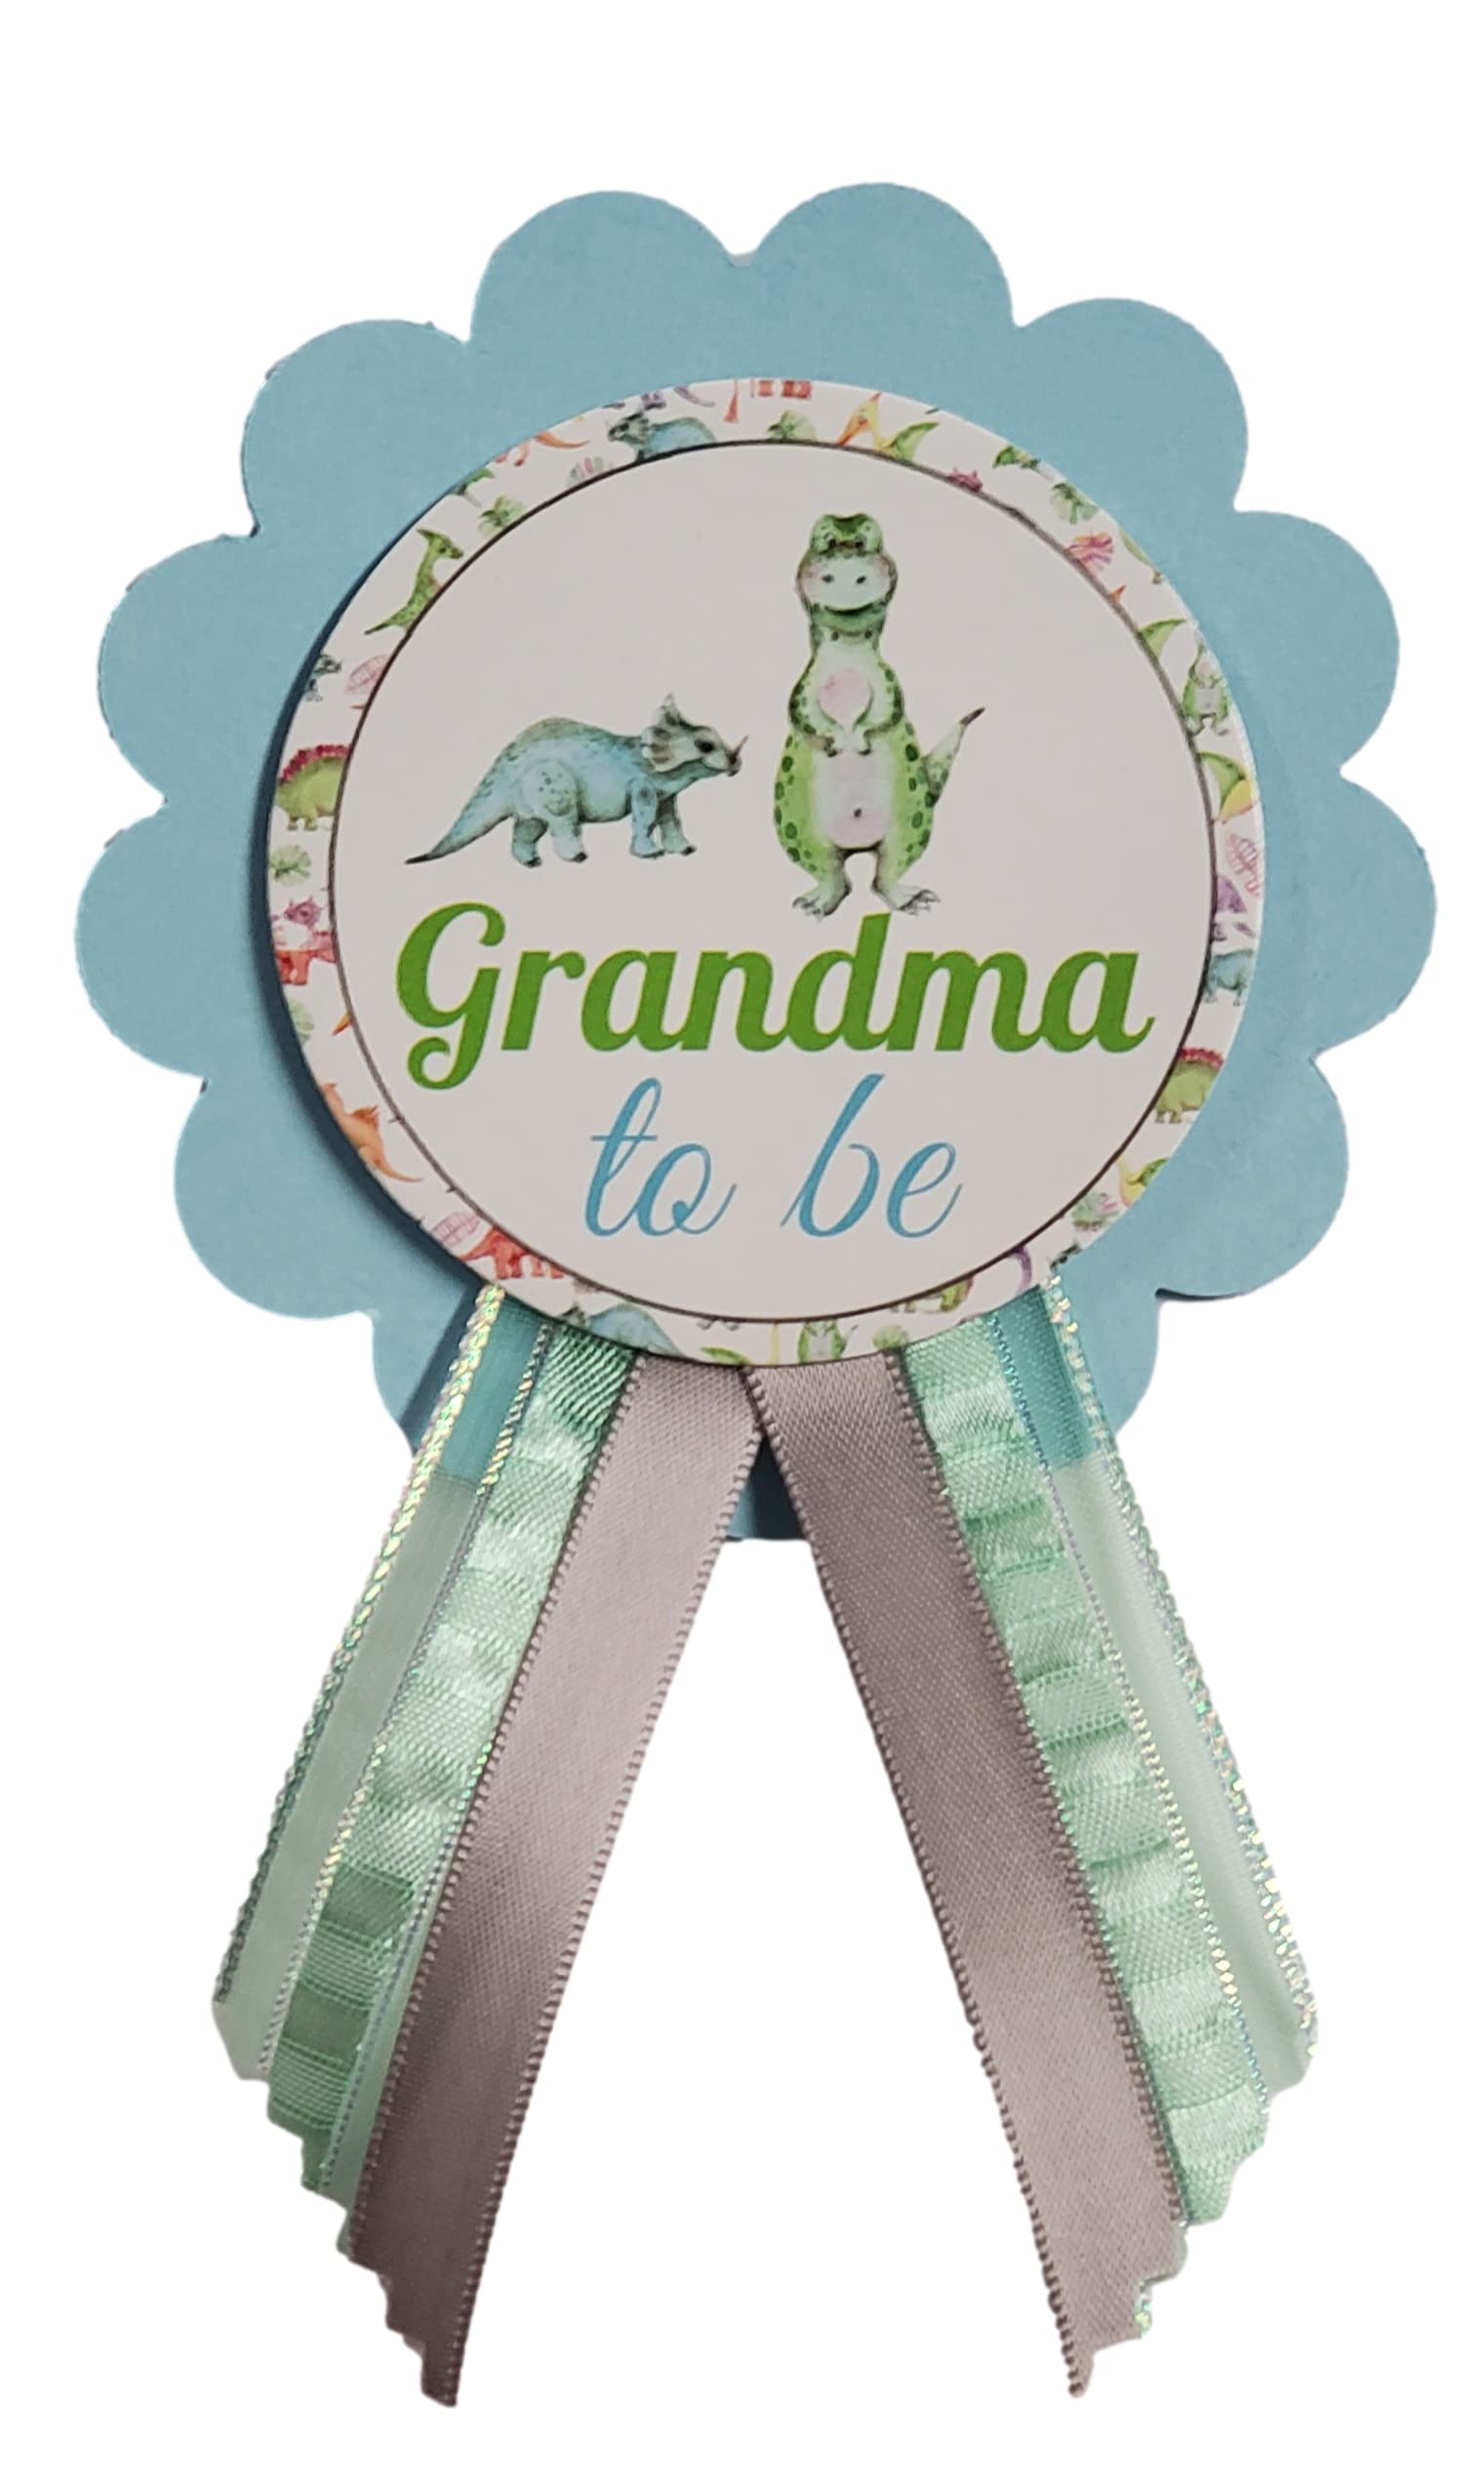 Grandma to Be Pin Dinosaur Baby Shower Pin for Nona to wear, Blue & Green, It's a Boy Baby Sprinkle Tyrannosaurus Decorations Badge Button